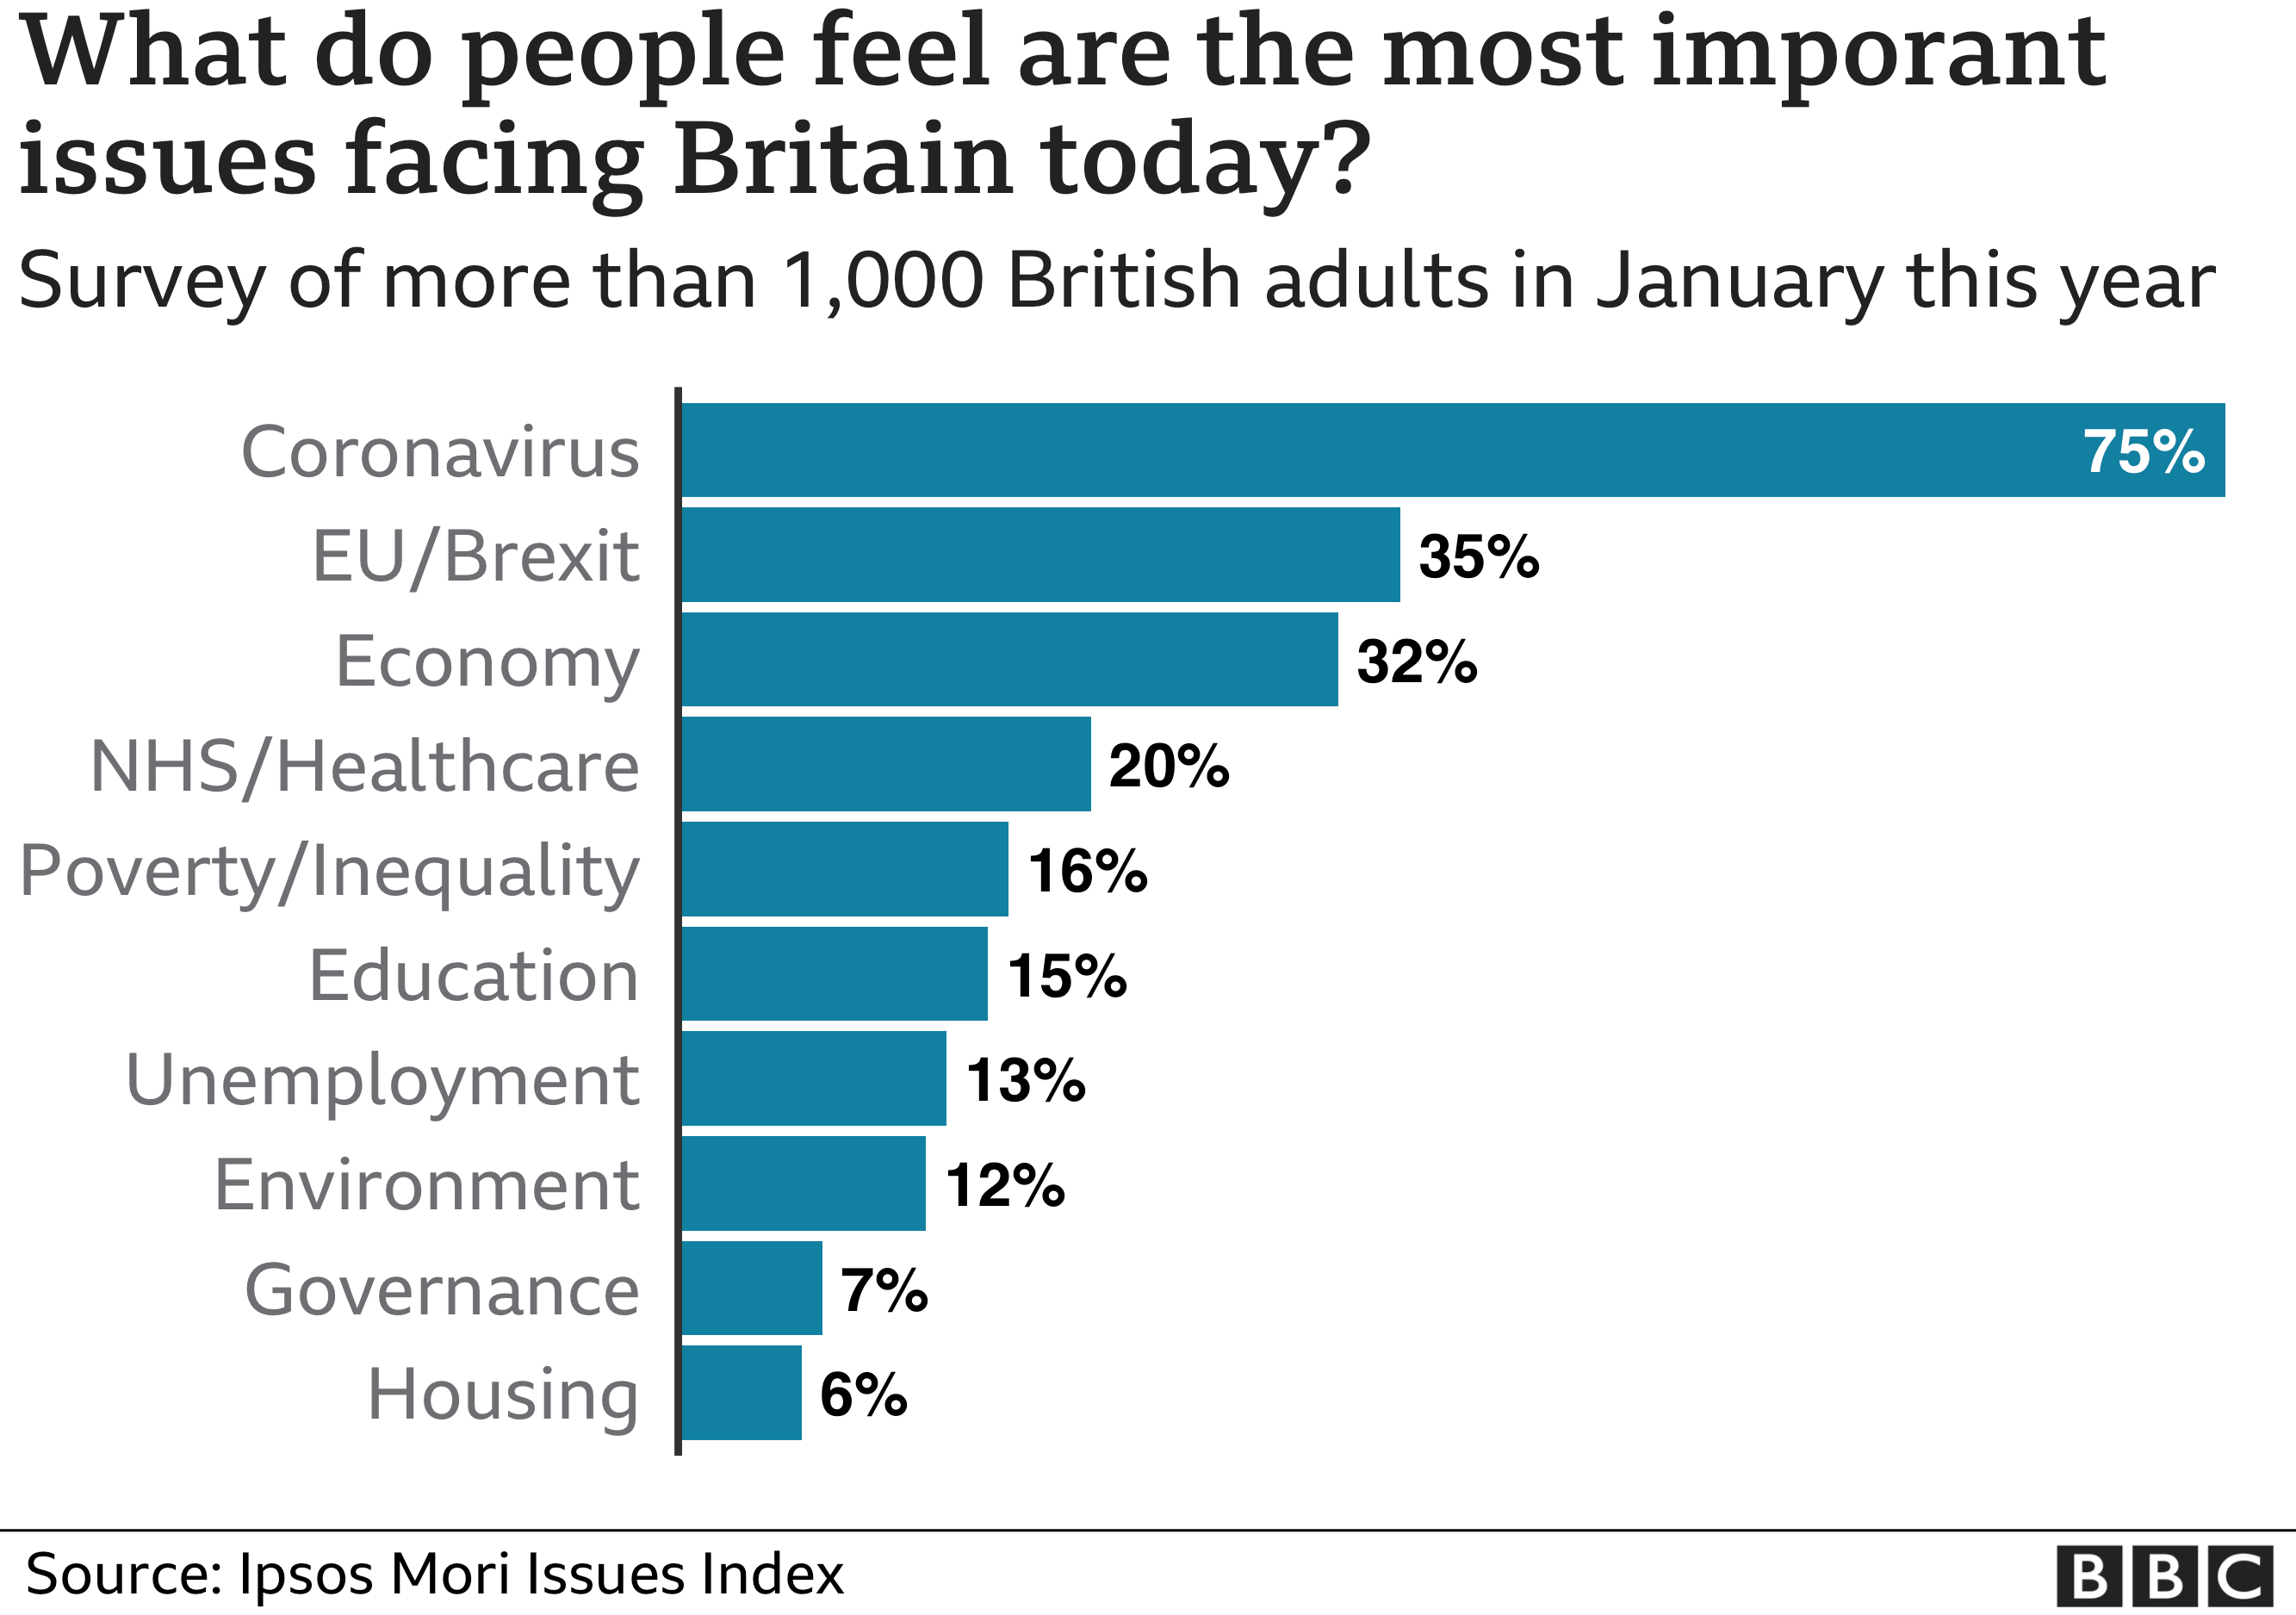 List of issues UK voters consider the most important. Coronavirus 75%, EU/Brexit 35%, Economy 32%, NHS 20%